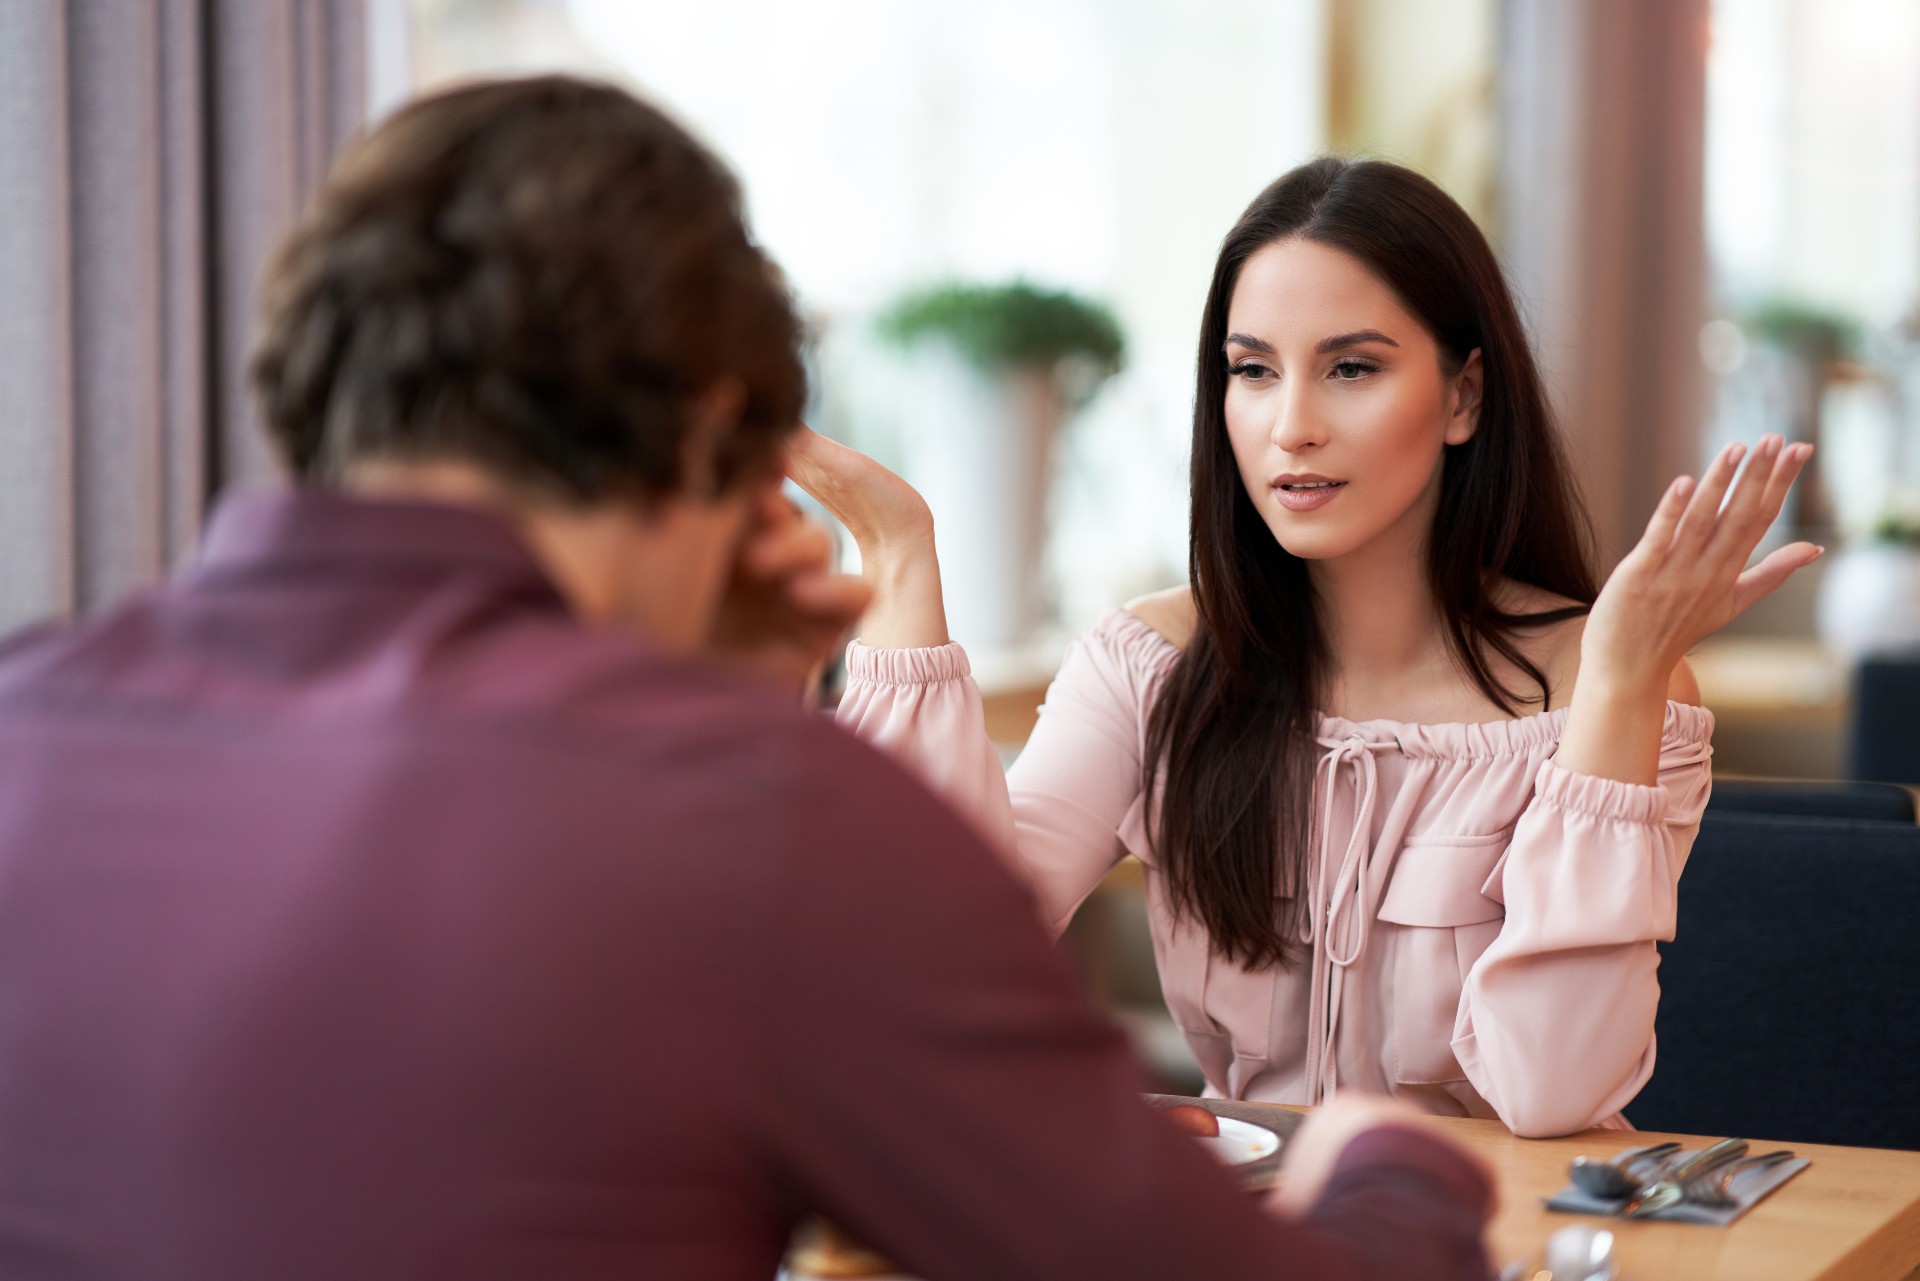 woman in pink looking frustrated hands raised at man with head down across table